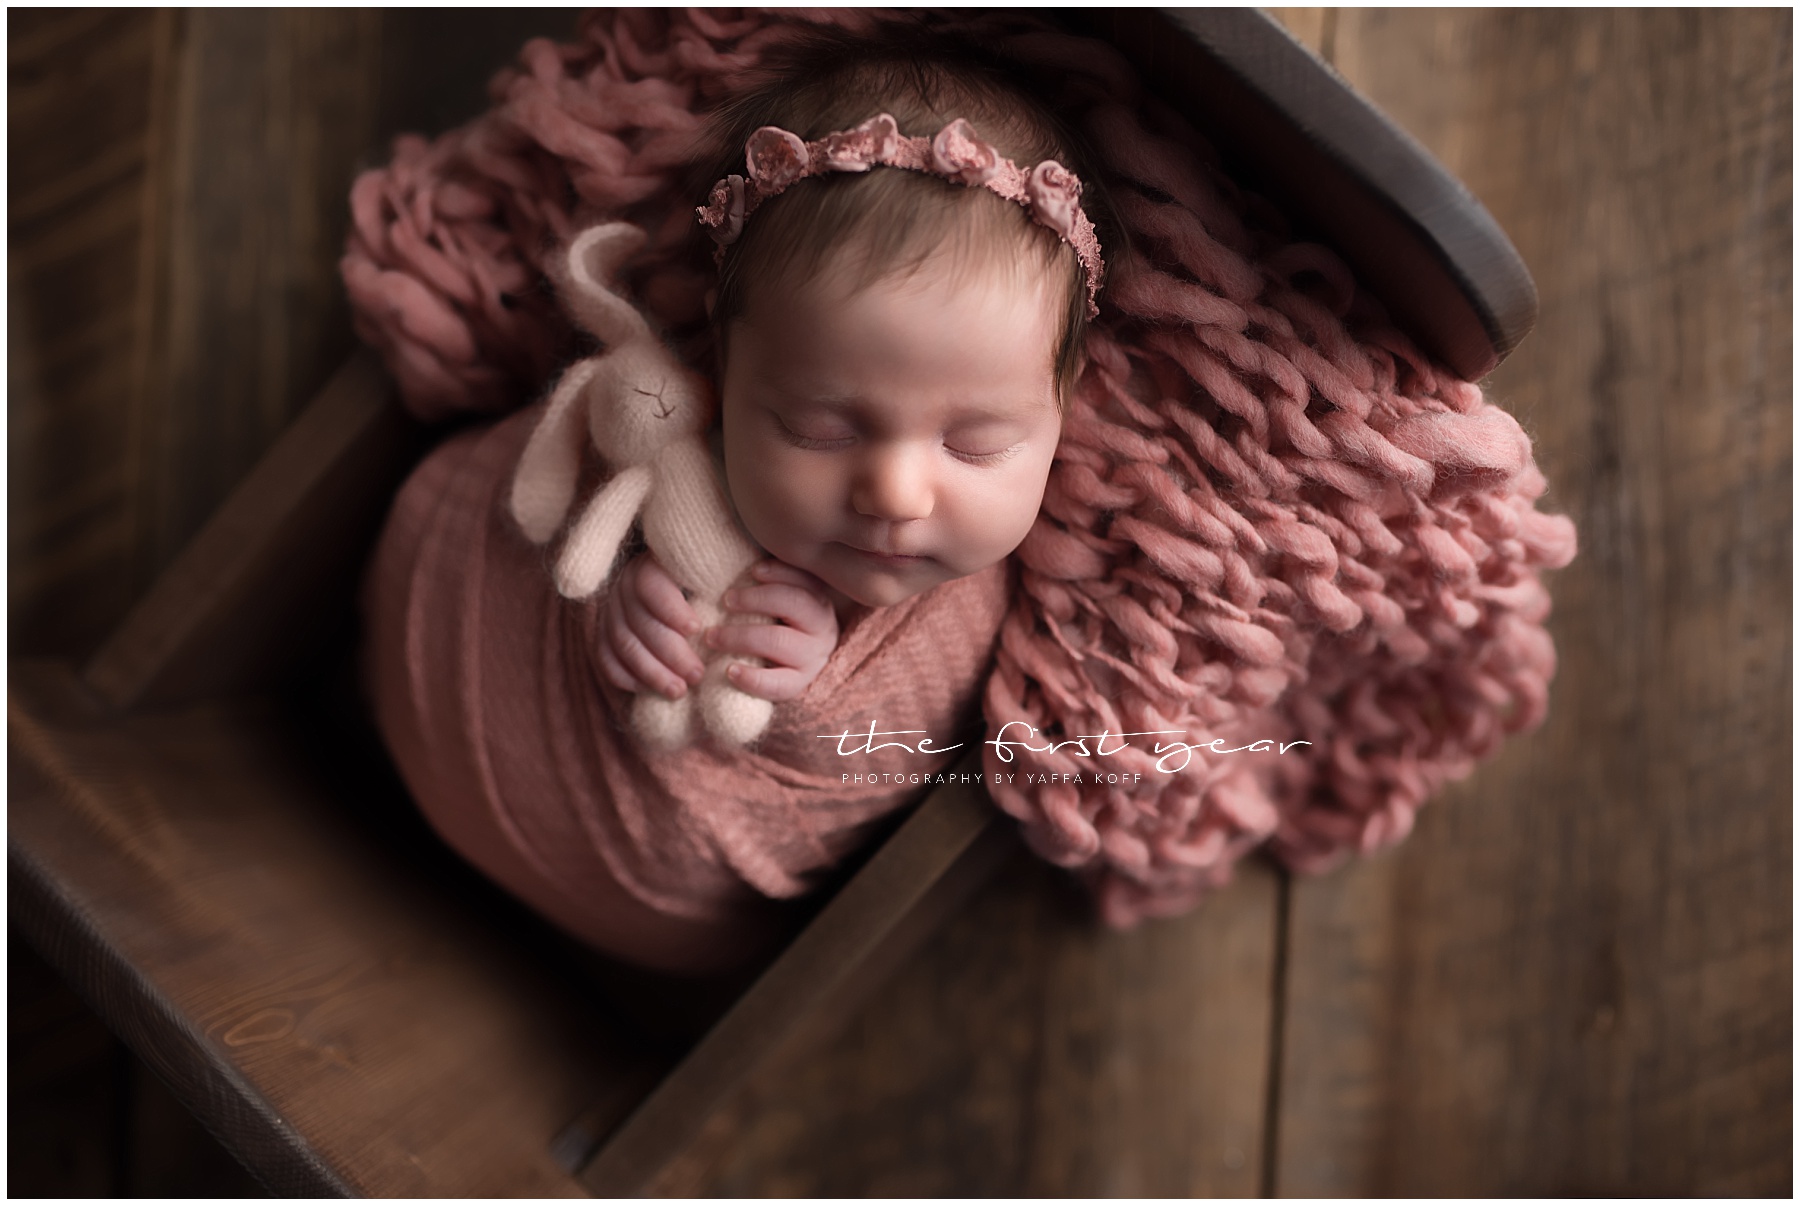 How to Prepare for your Newborn Session